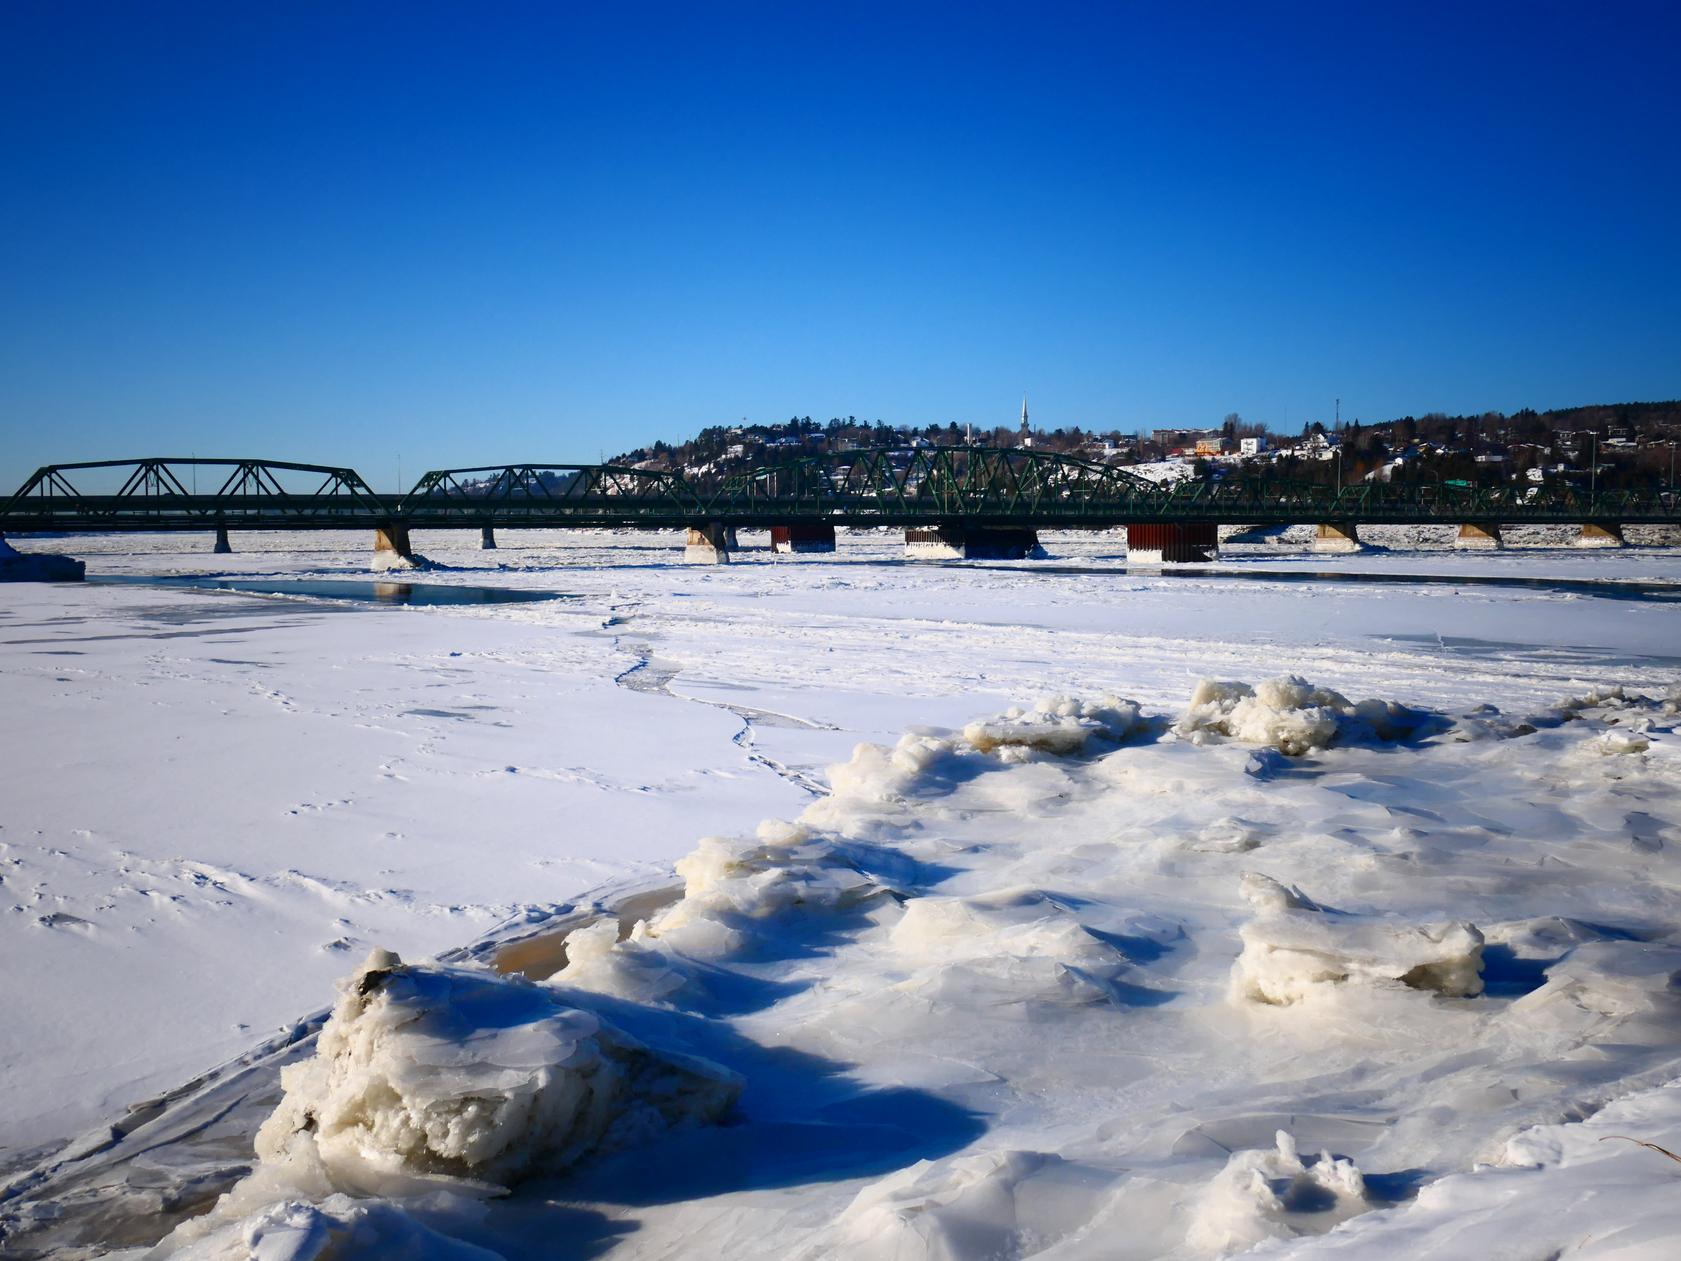 The Sainte-Anne Bridge in Chicoutimi, Saguenay, QC, on a bright winter's day, with the Saguenay river mostly frozen over.